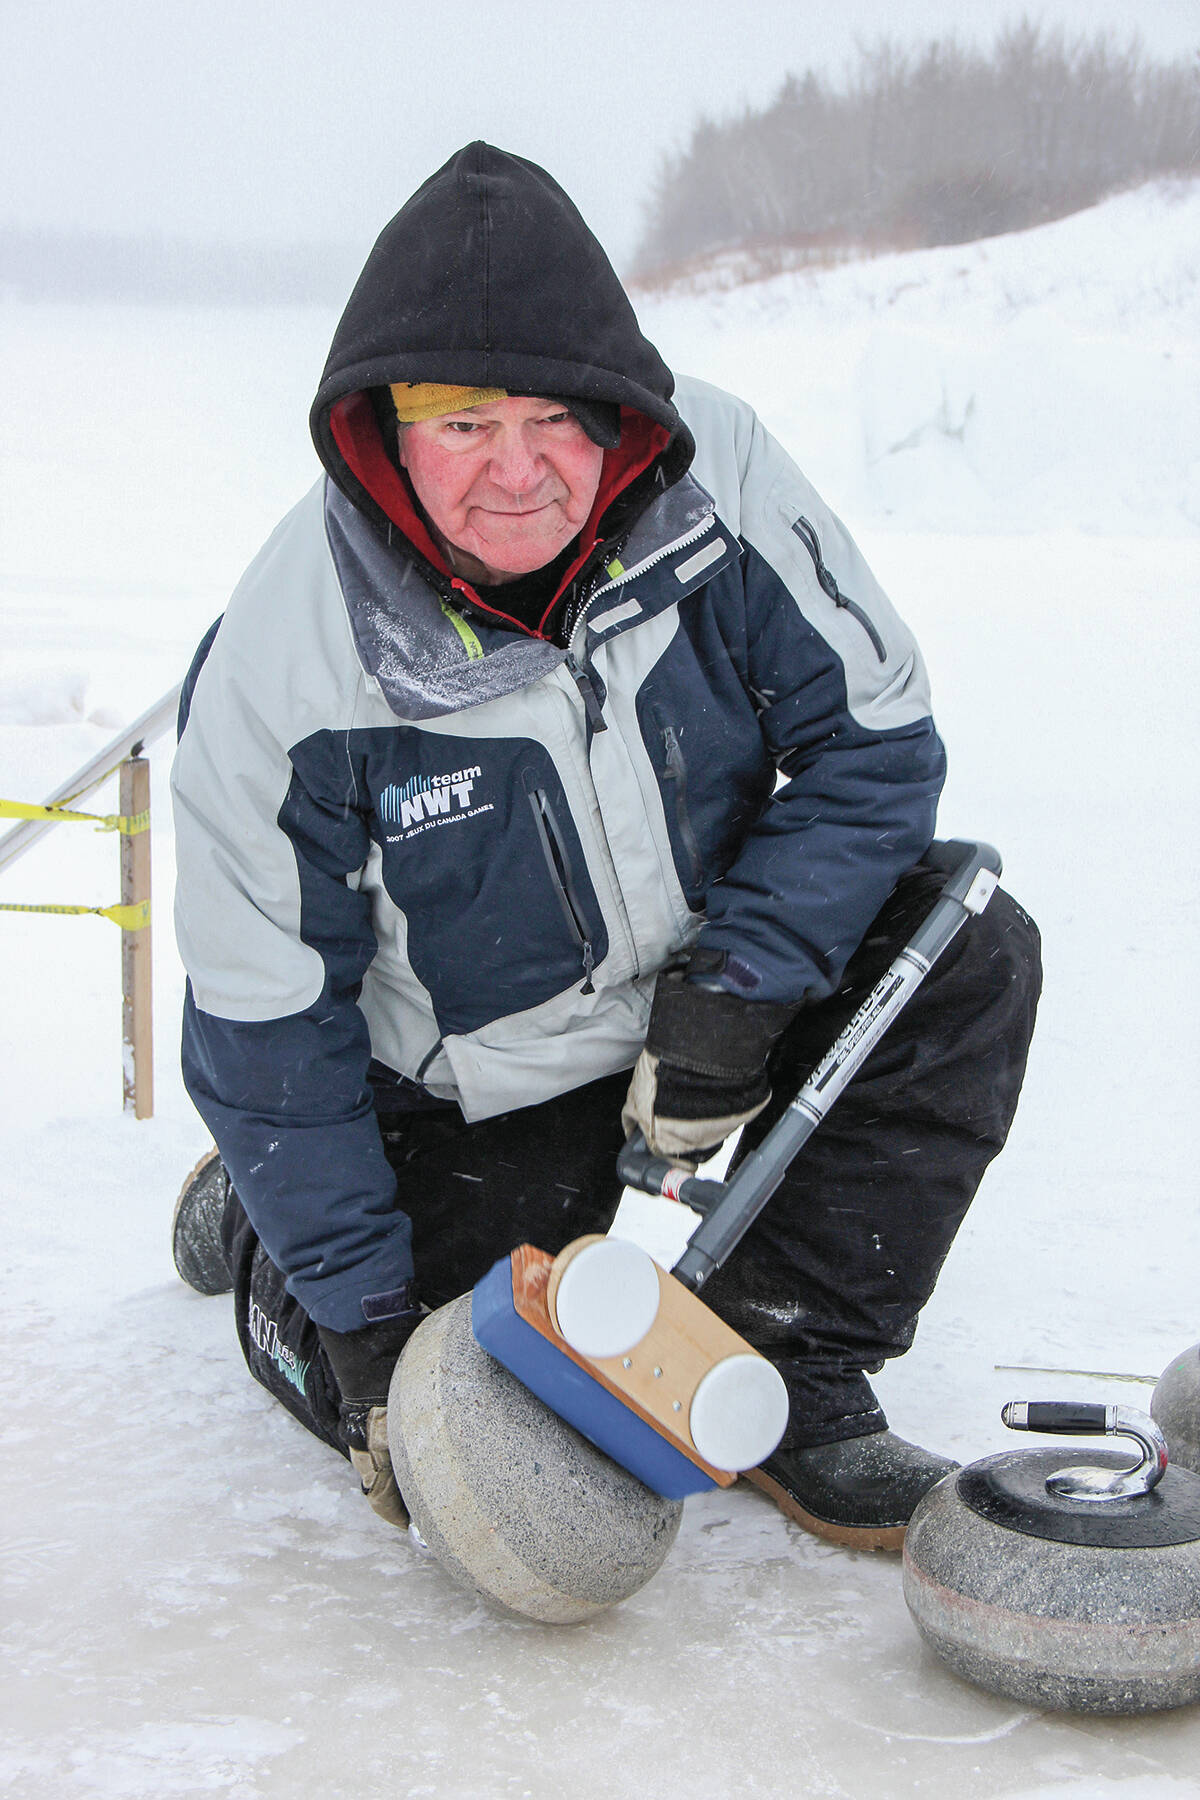 Paul Delorey, who passed away on Jan. 1, 2020, was well-known for his love of curling, even setting up an outdoor curling sheet on the Hay River in February of 2017 for Winter Celebration. NNSL file photo